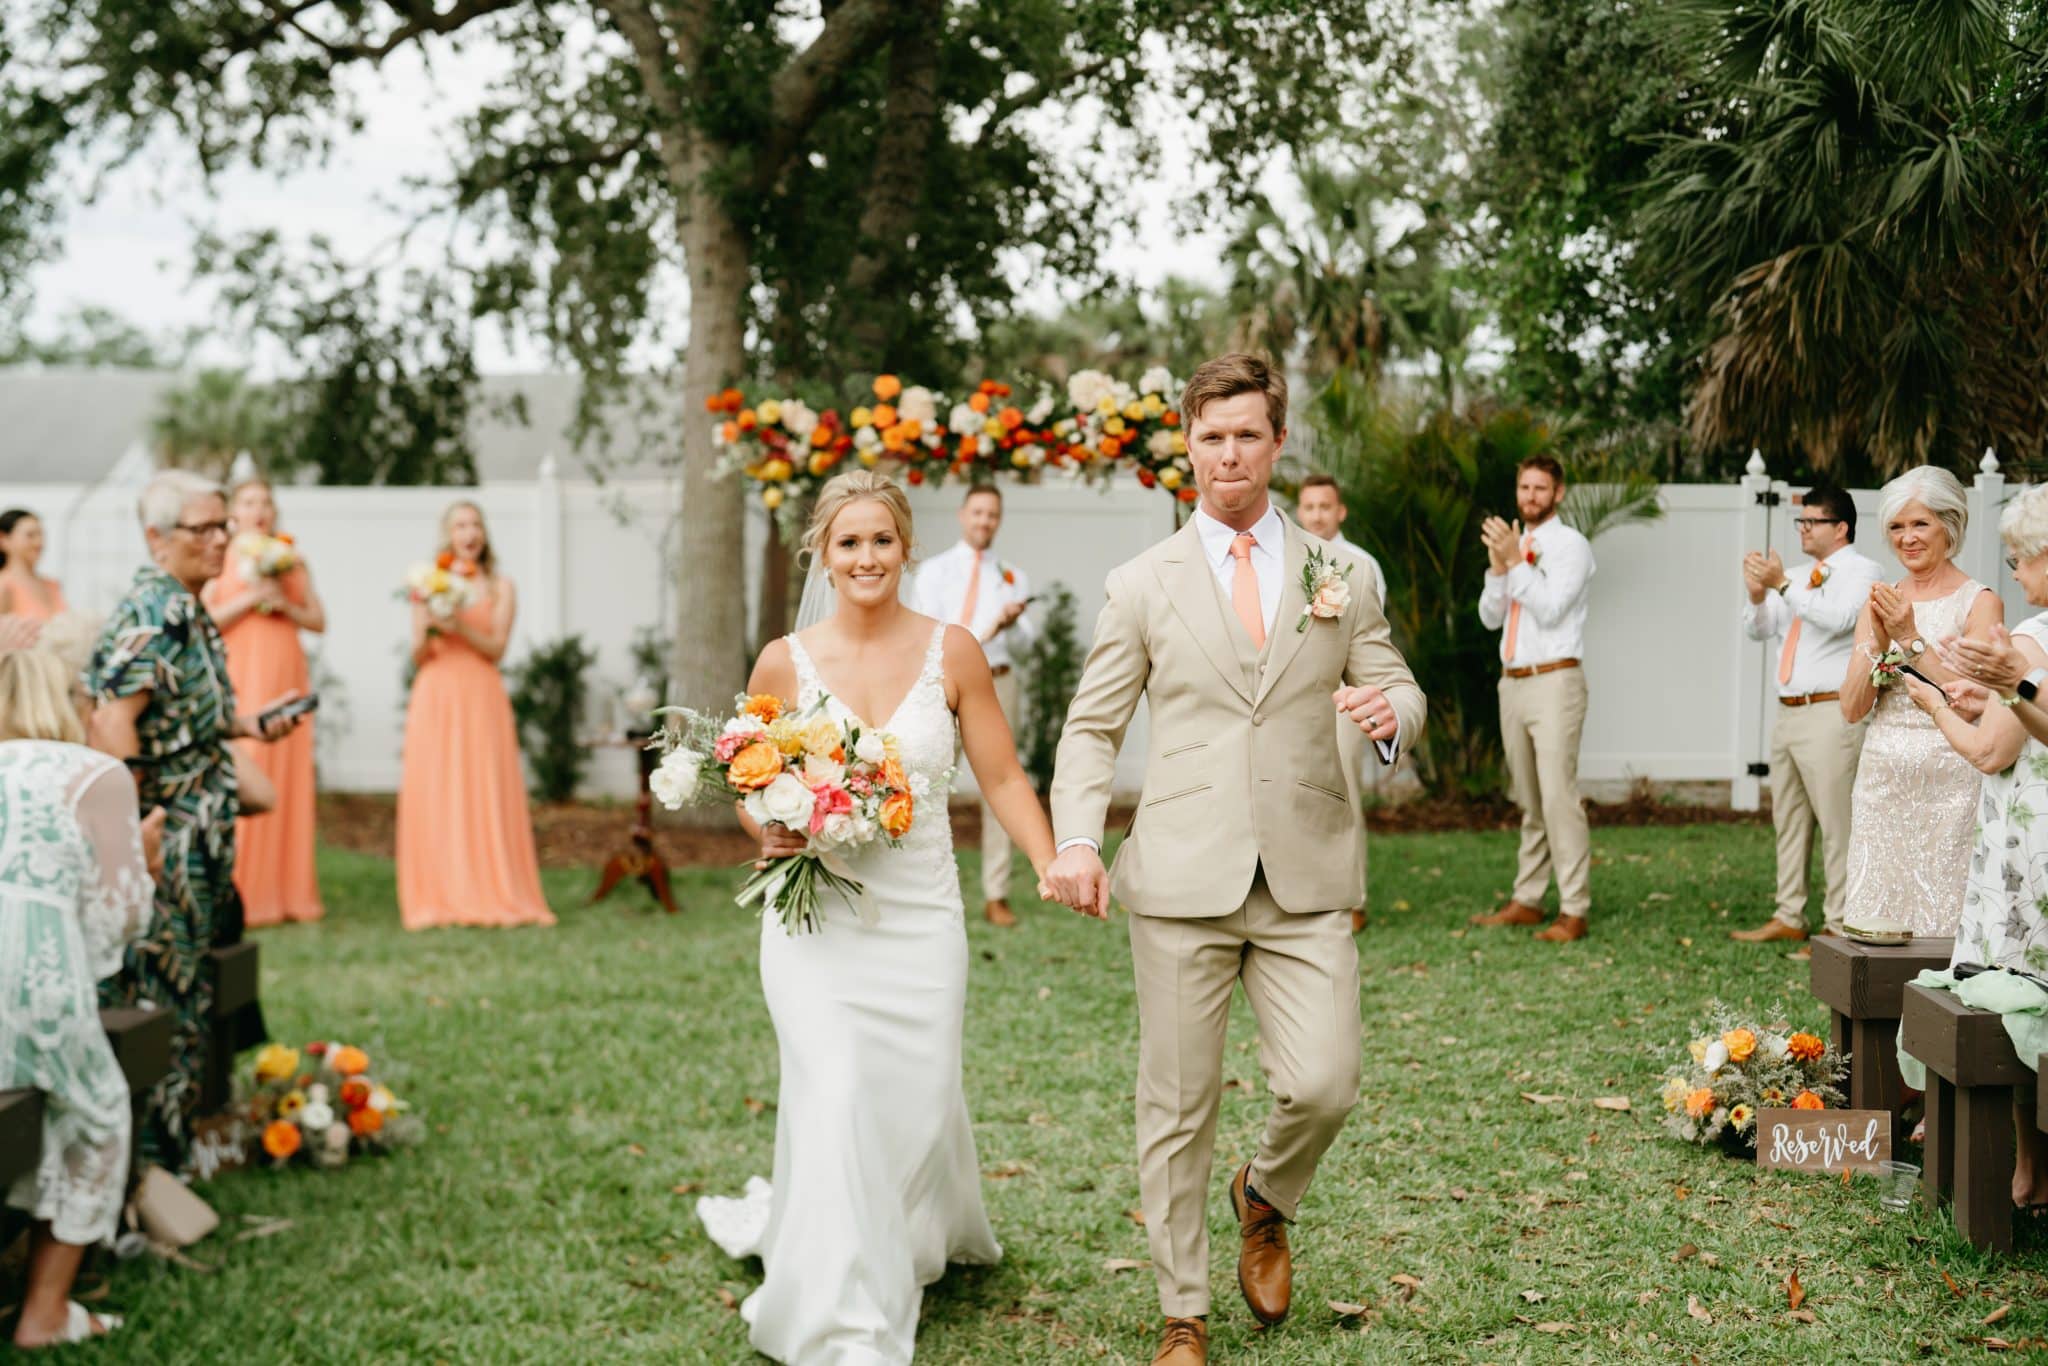 Newlyweds walk down the isle after their ceremony at charming spring wedding at The Grand Ol' Barn in New Smyrna, Florida